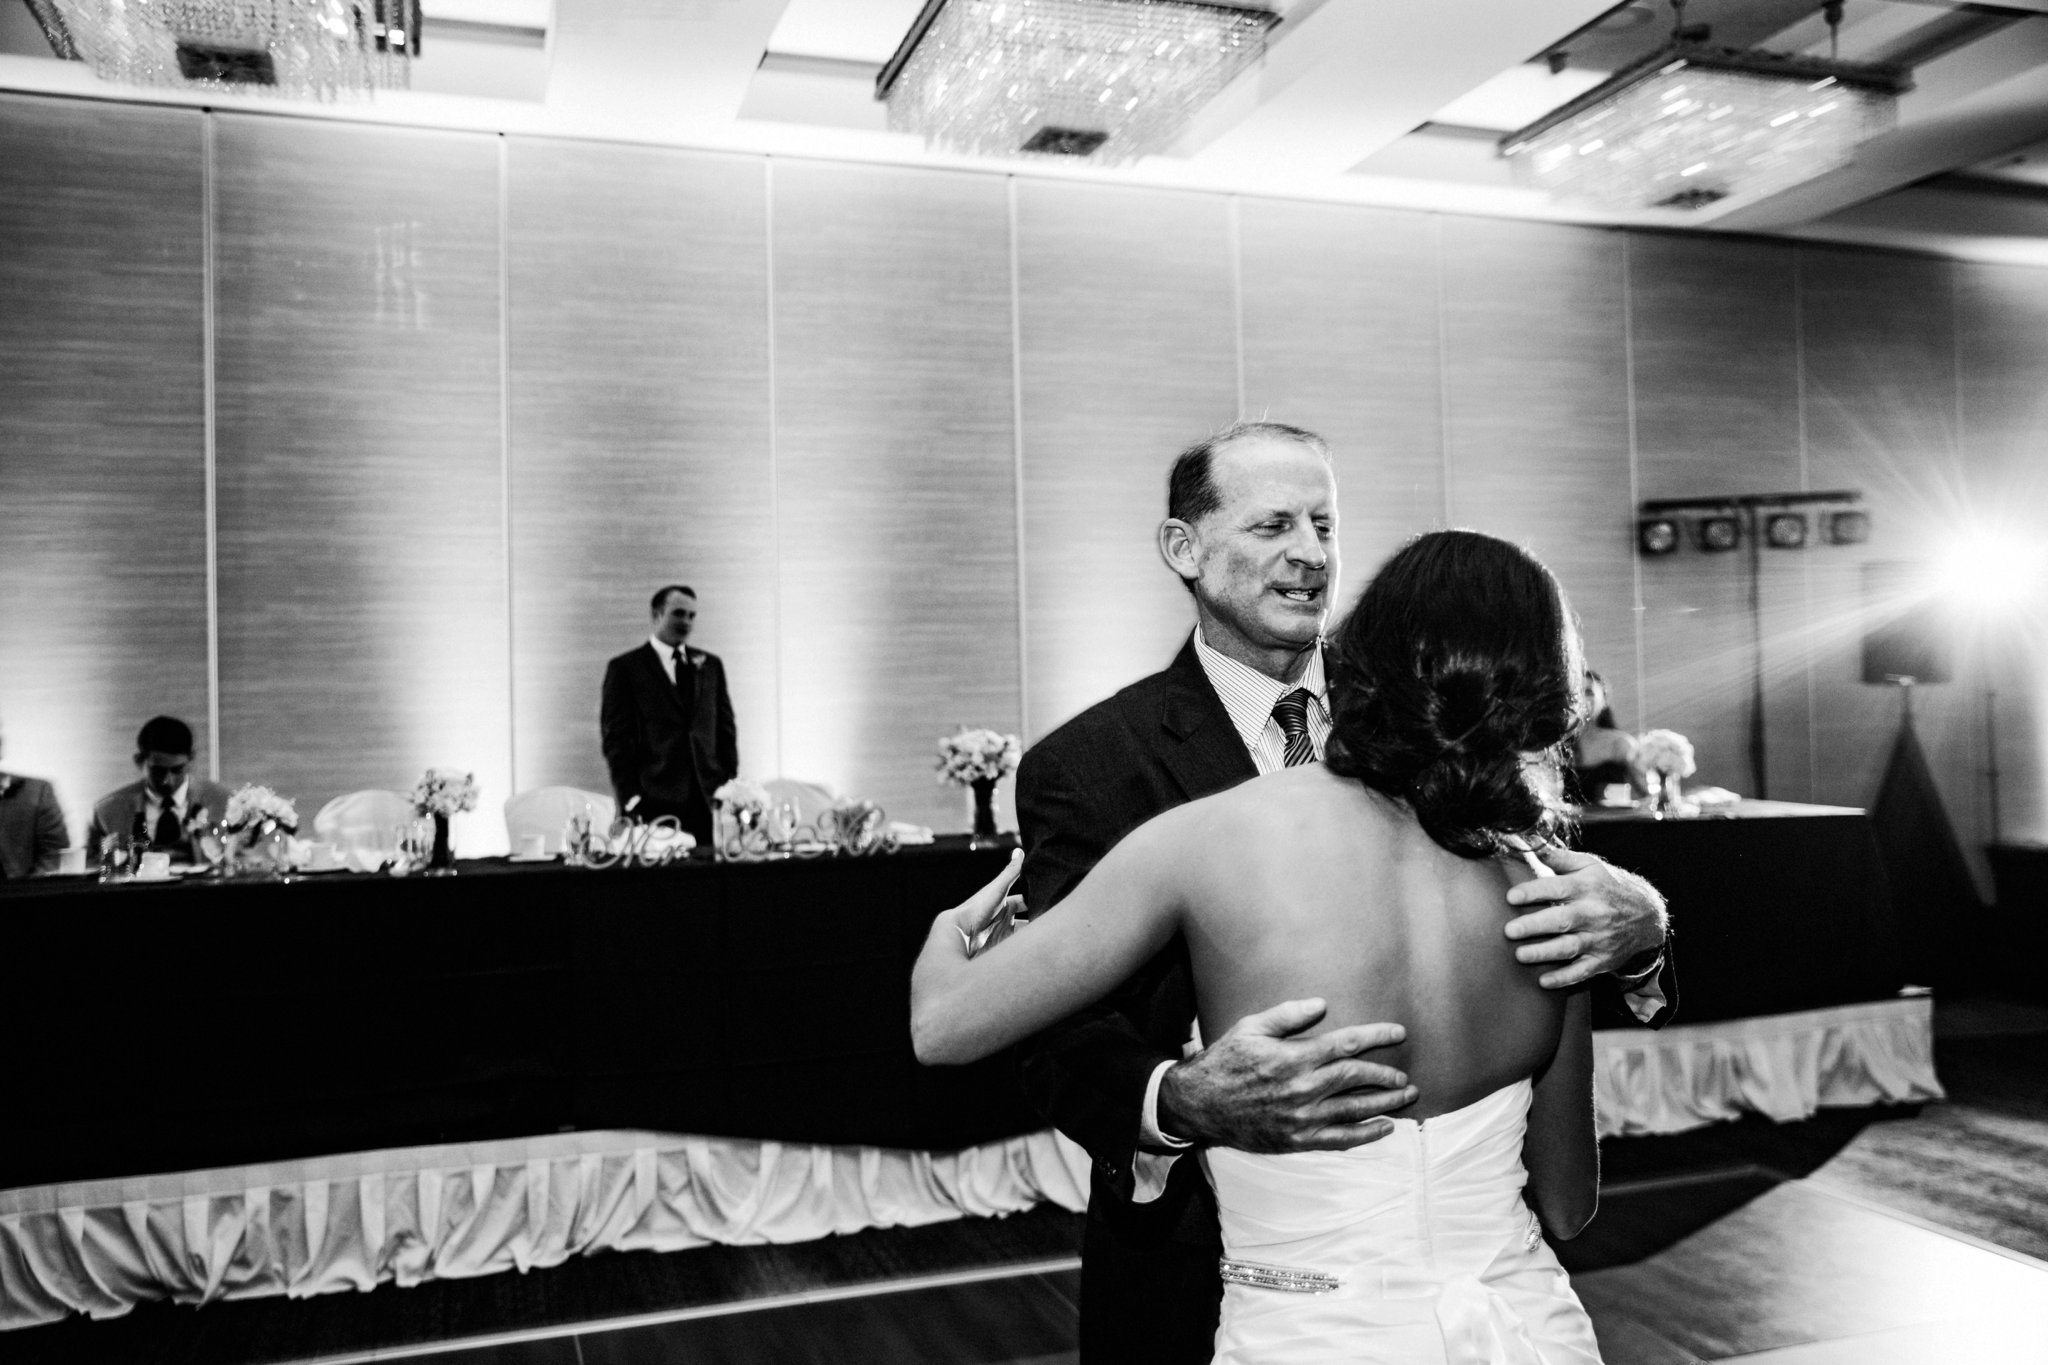 black and white | wedding | wedding photos | wedding photography | images by feliciathephotographer.com | Country Club Plaza | Kansas City | The Marriott | Unity Temple | reception venue | reception activities | father daughter dance 